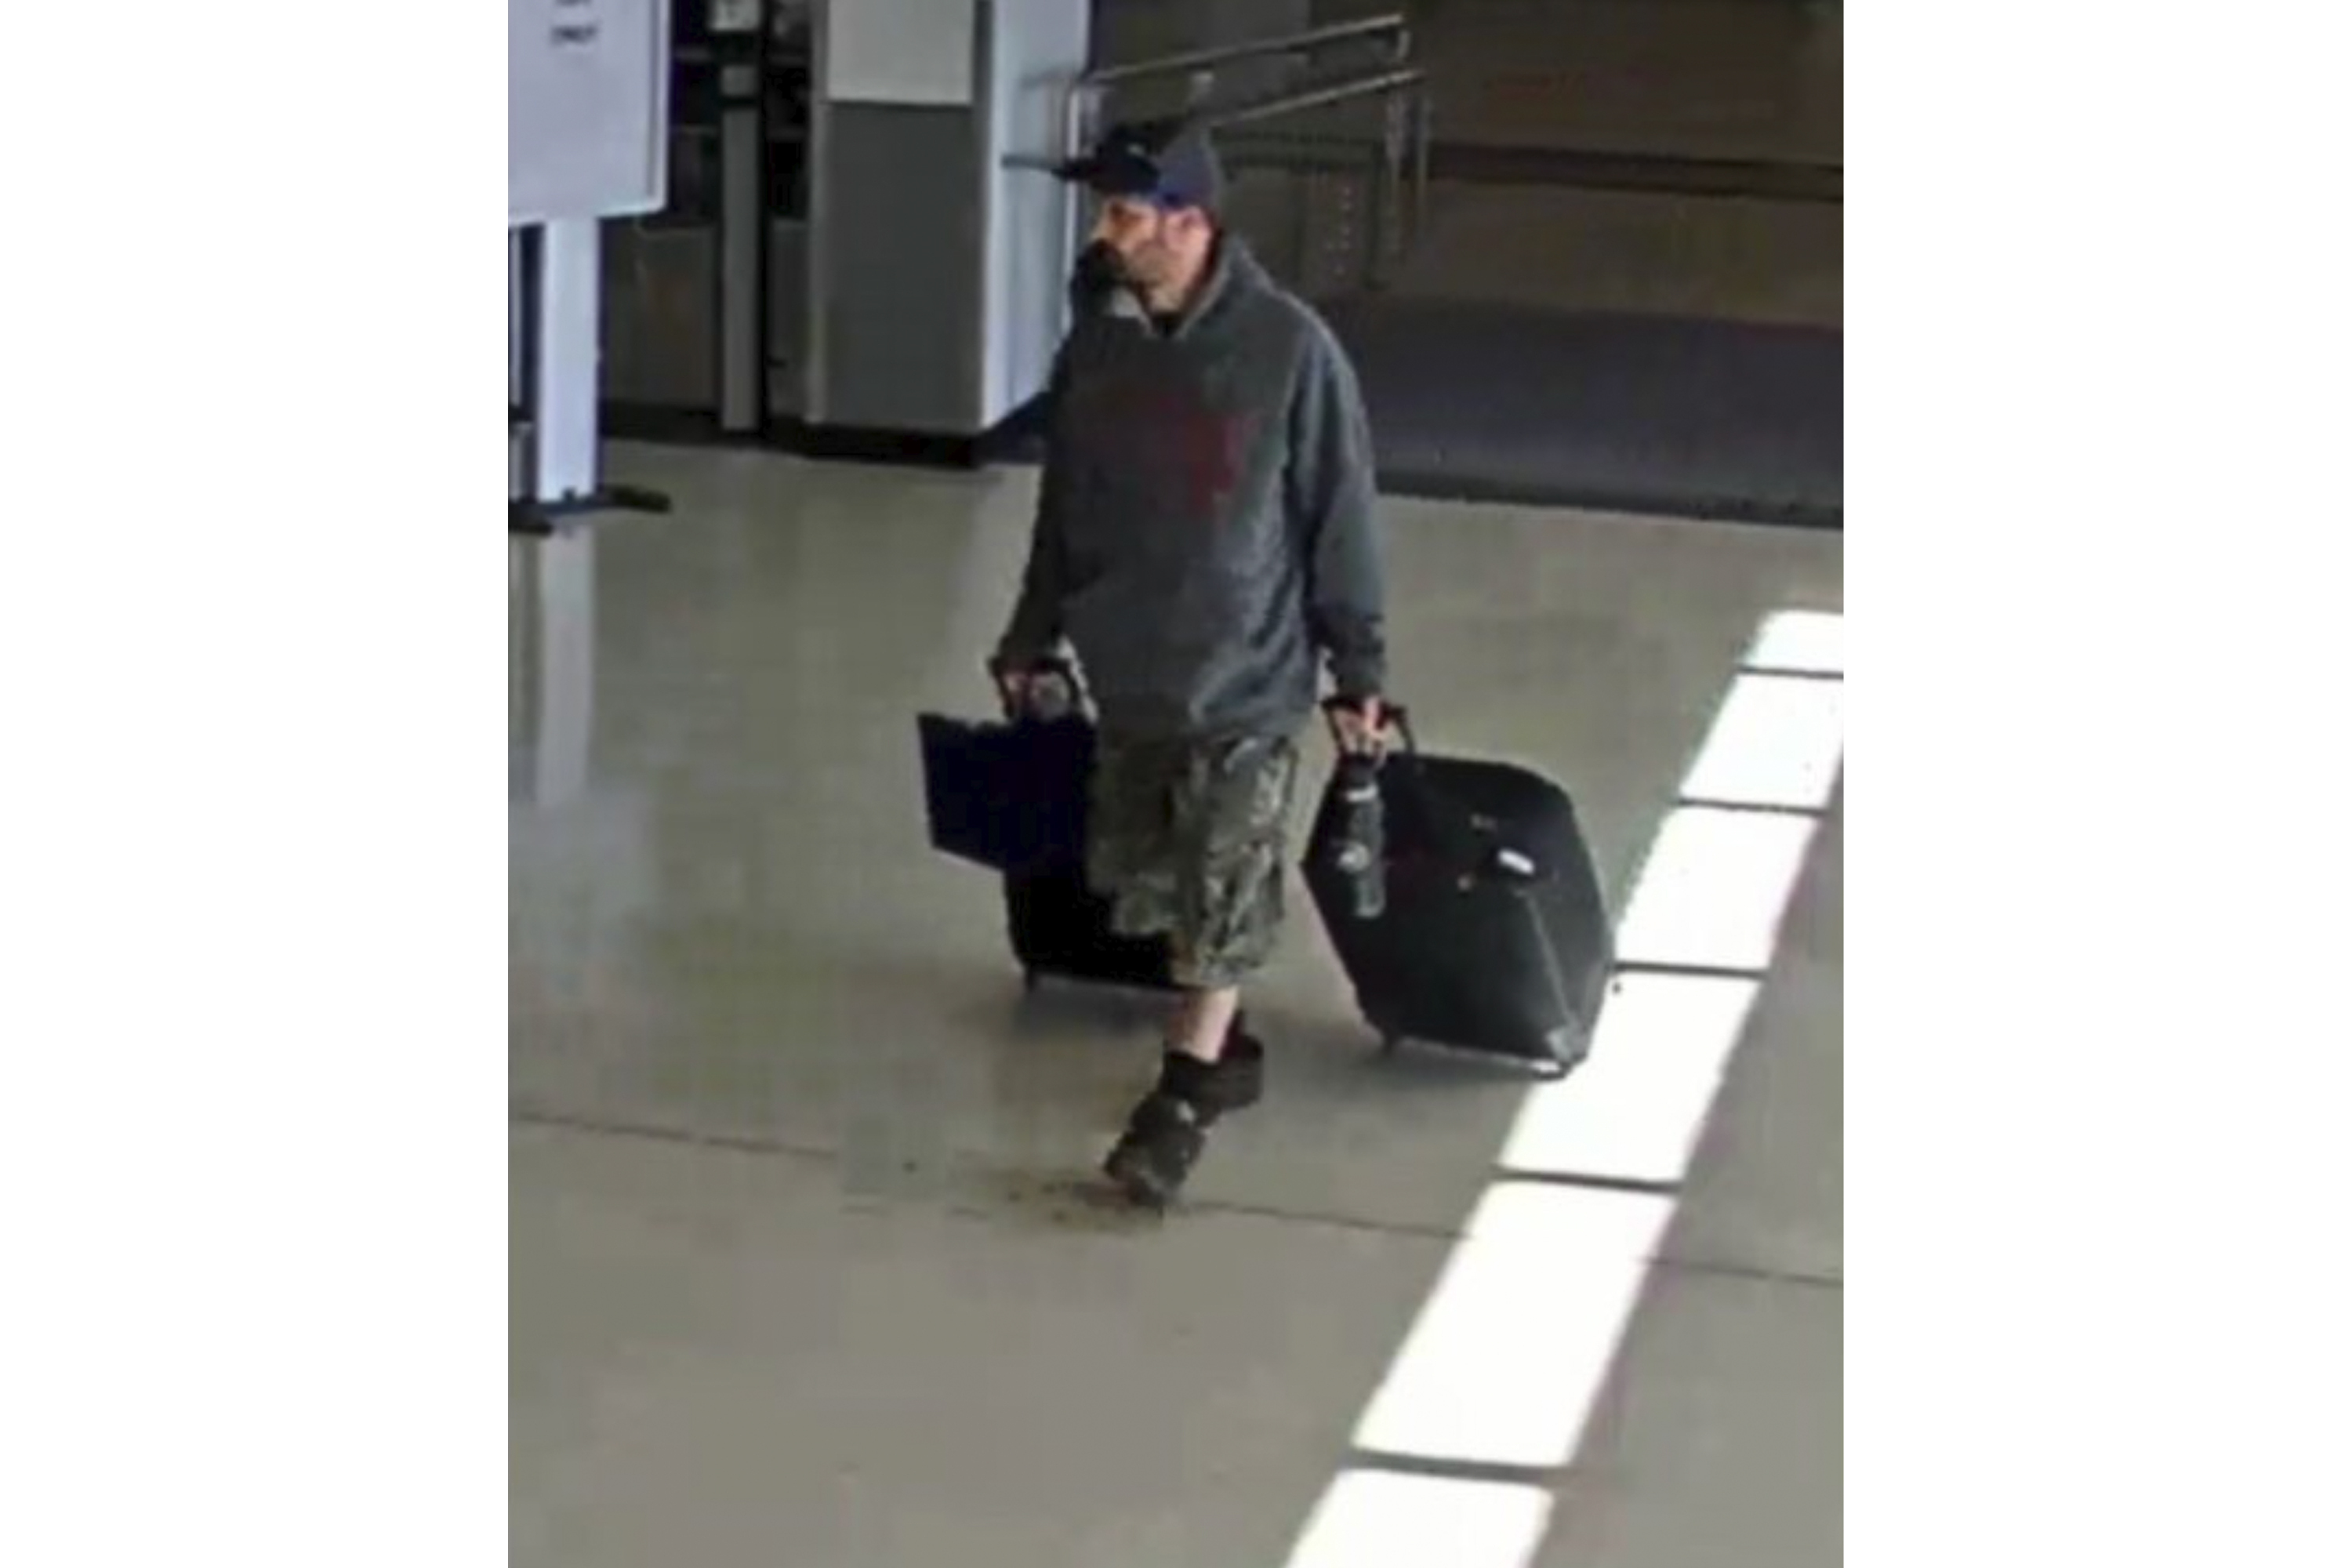 camera image released in an FBI affidavit shows alleged suspect Marc Muffley at Lehigh Valley International Airport